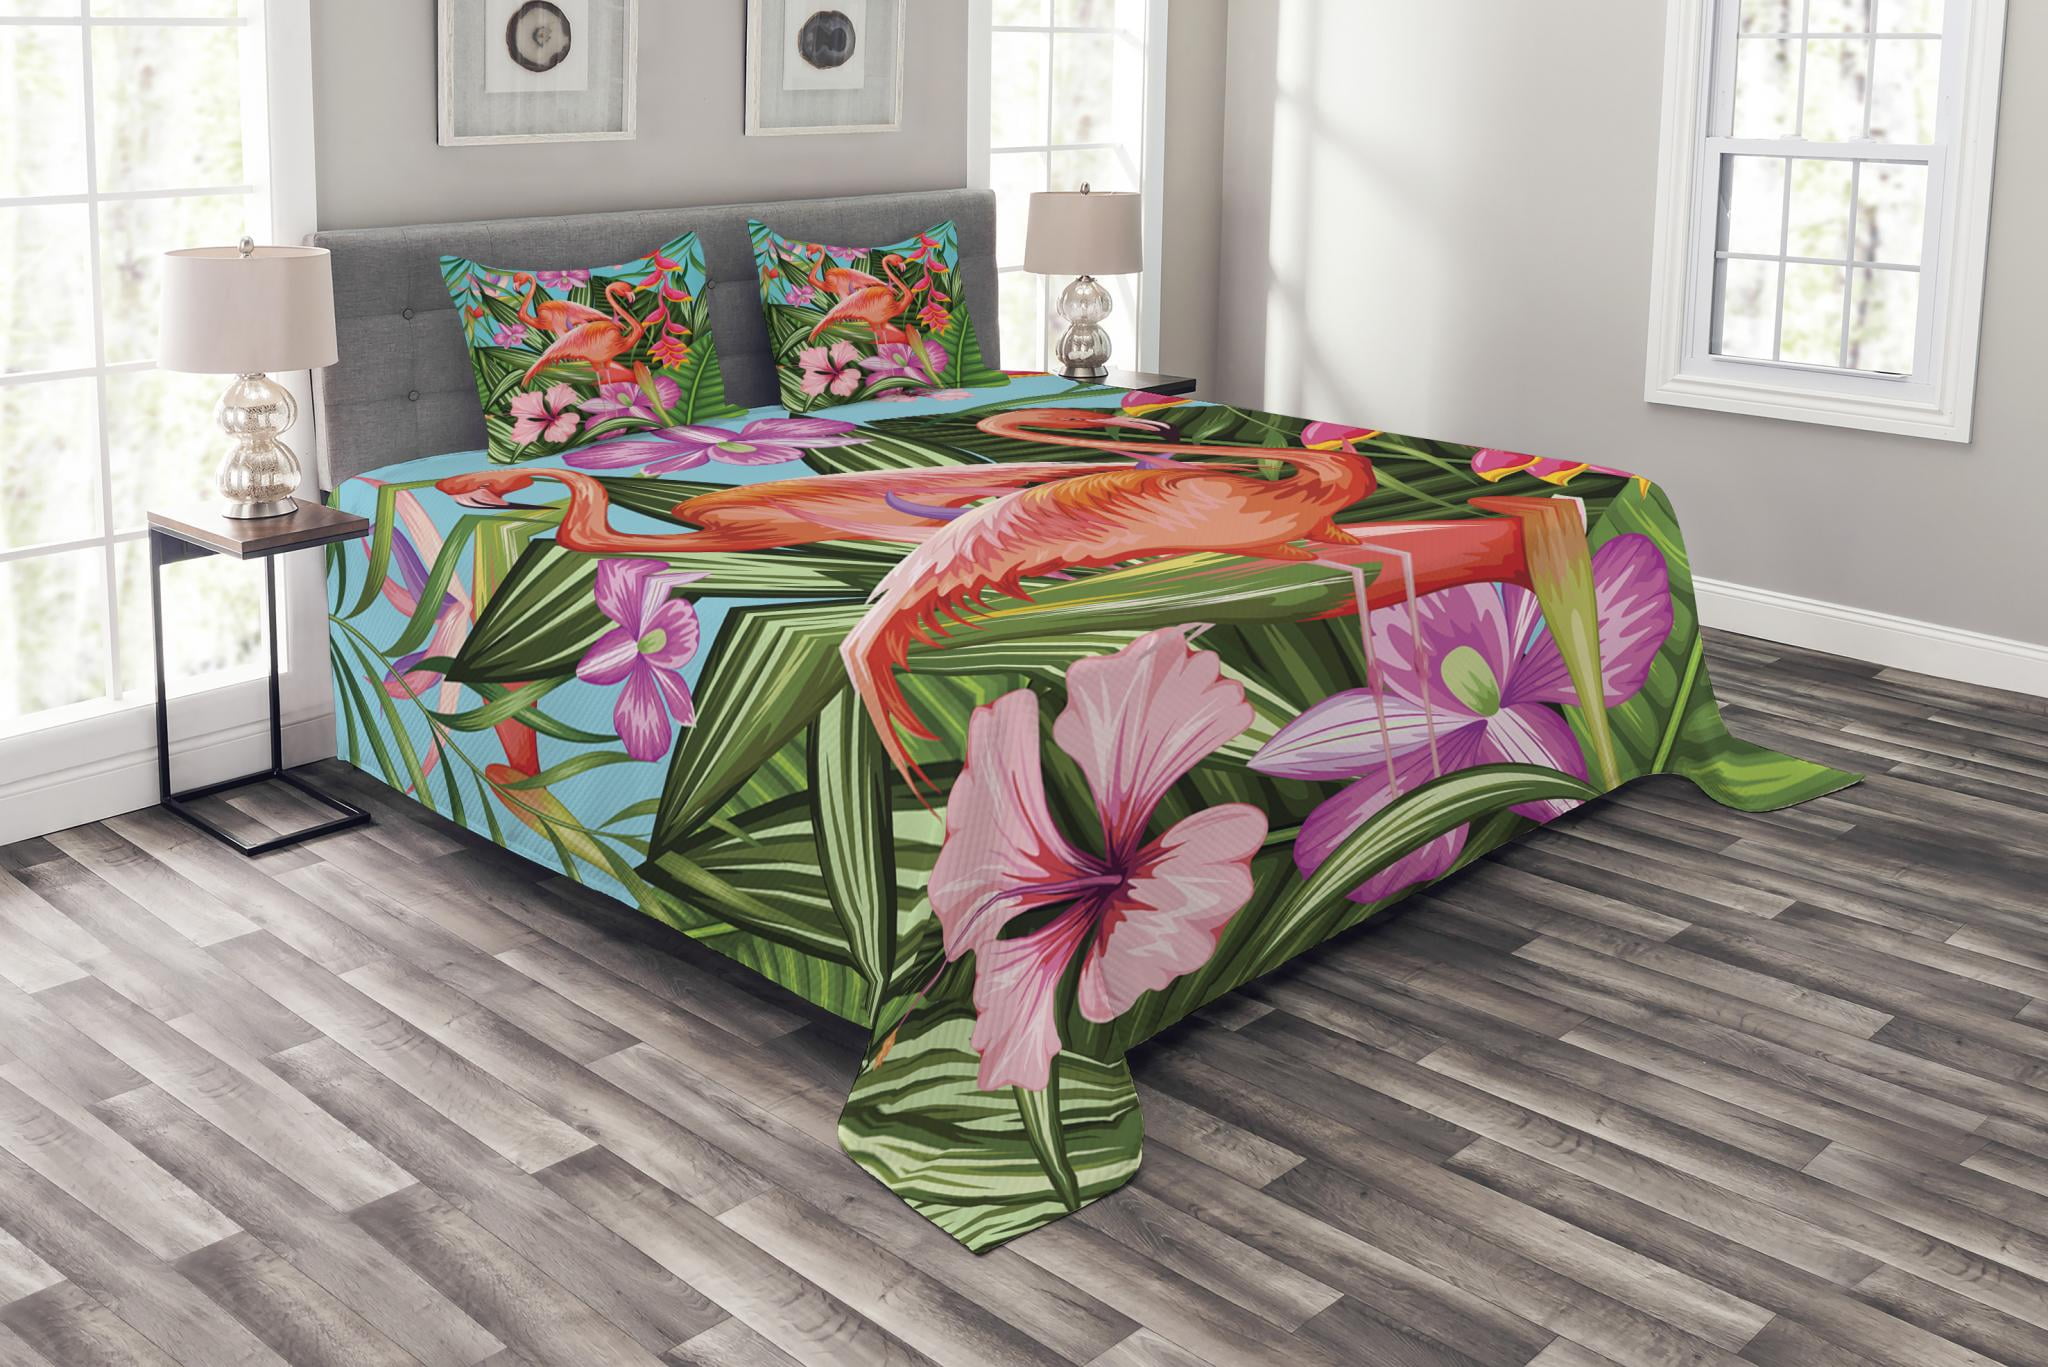 Quilted Coverlet Bedspread Flamingo with Tropical Palm Tree Garden Hibiscus Flower Plant Soft Cozy Microfiber Throw Blanket for Bed Couch or Sofa 64 X 88